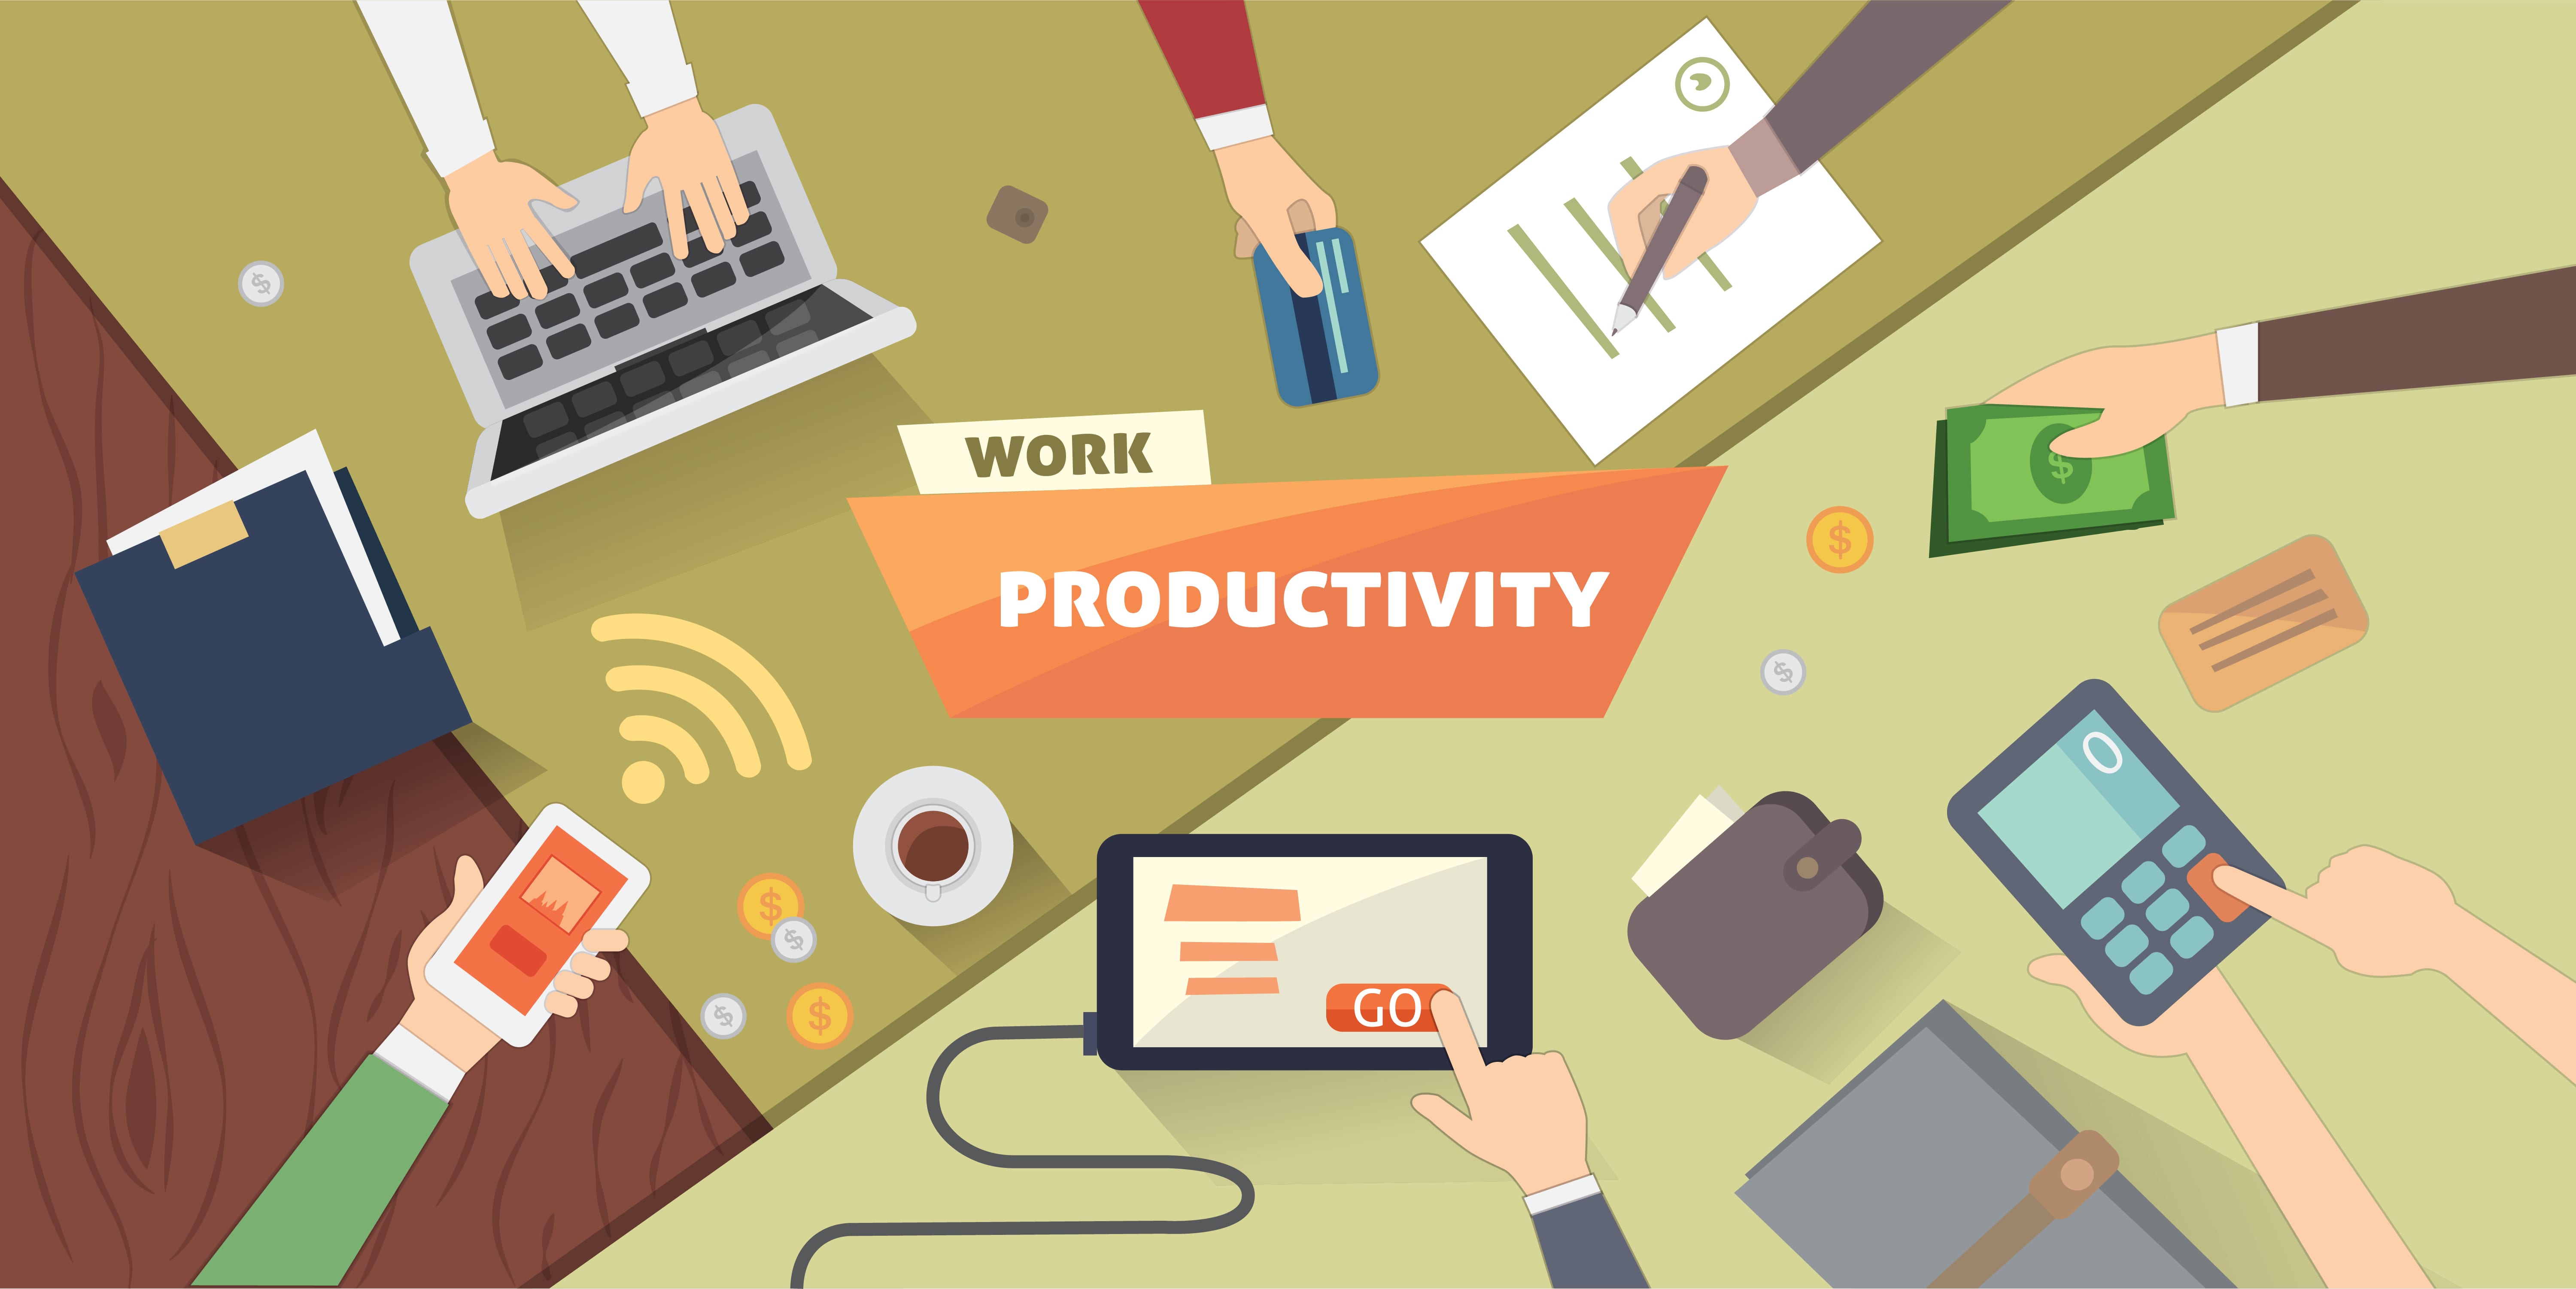 5 Ways to Manage Time and Improve Productivity at Work